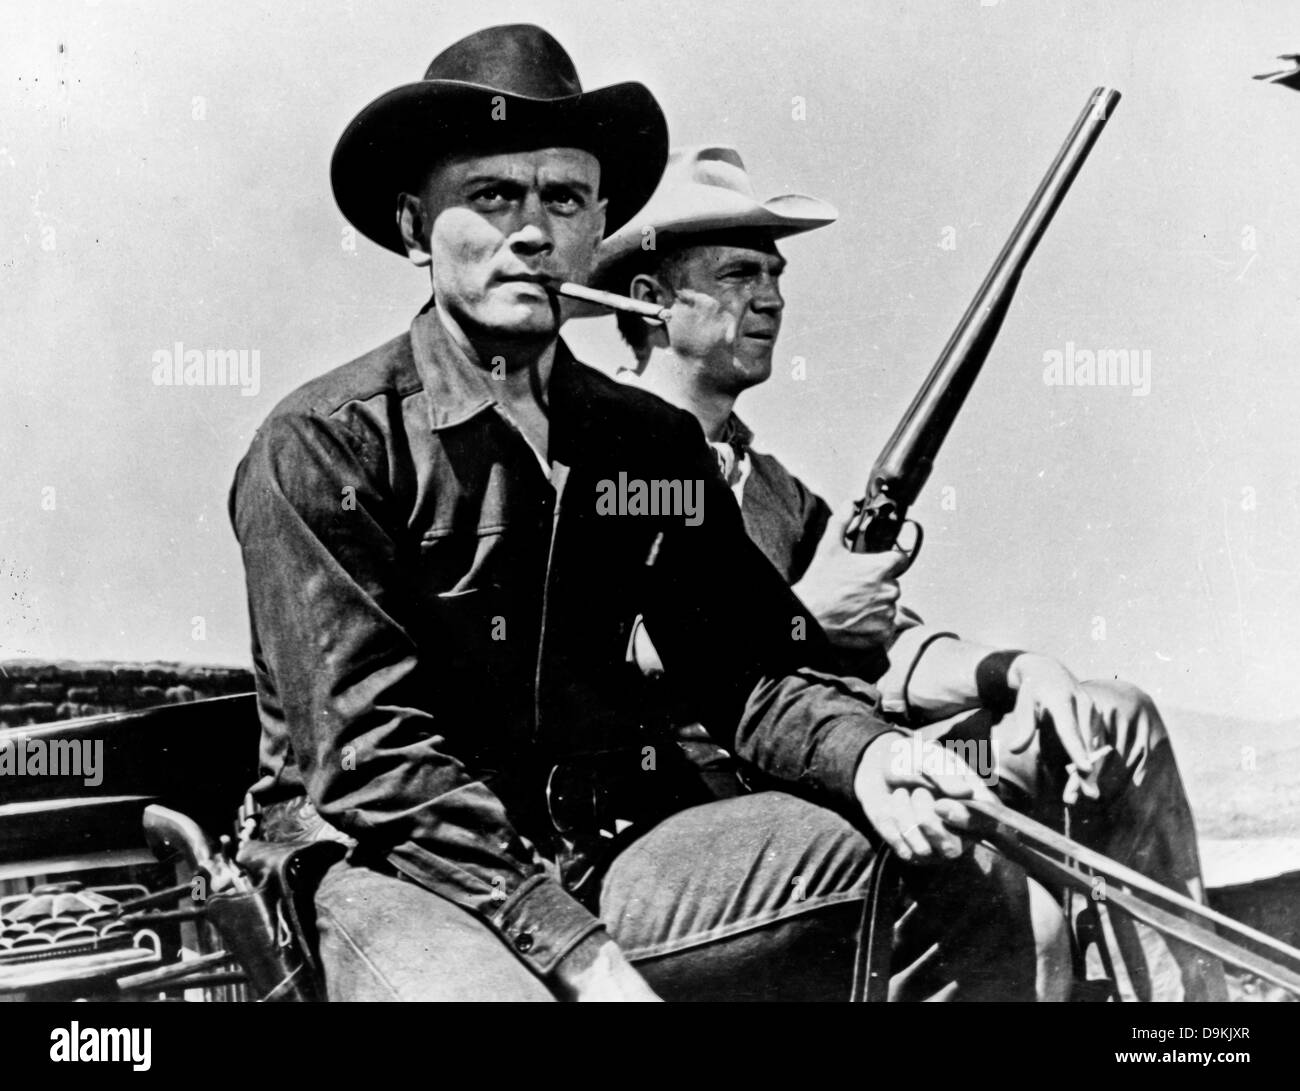 Steve McQueen and Yul Brynner in the film The Magnificent Seven PUBLICITY PHOTO 